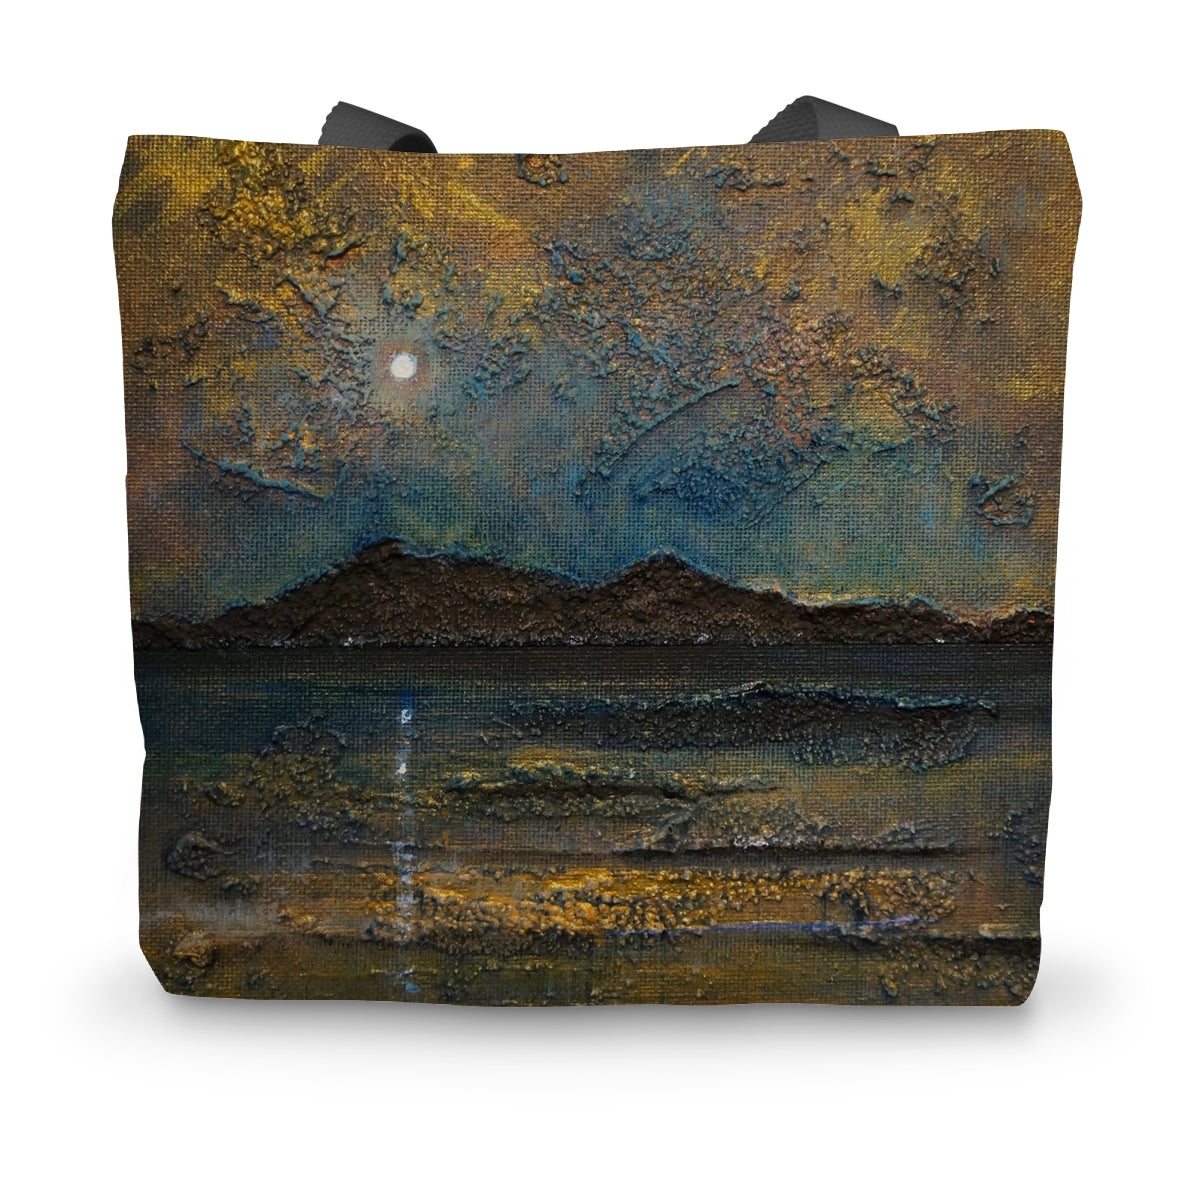 Arran Moonlight Art Gifts Canvas Tote Bag-Bags-Arran Art Gallery-14"x18.5"-Paintings, Prints, Homeware, Art Gifts From Scotland By Scottish Artist Kevin Hunter